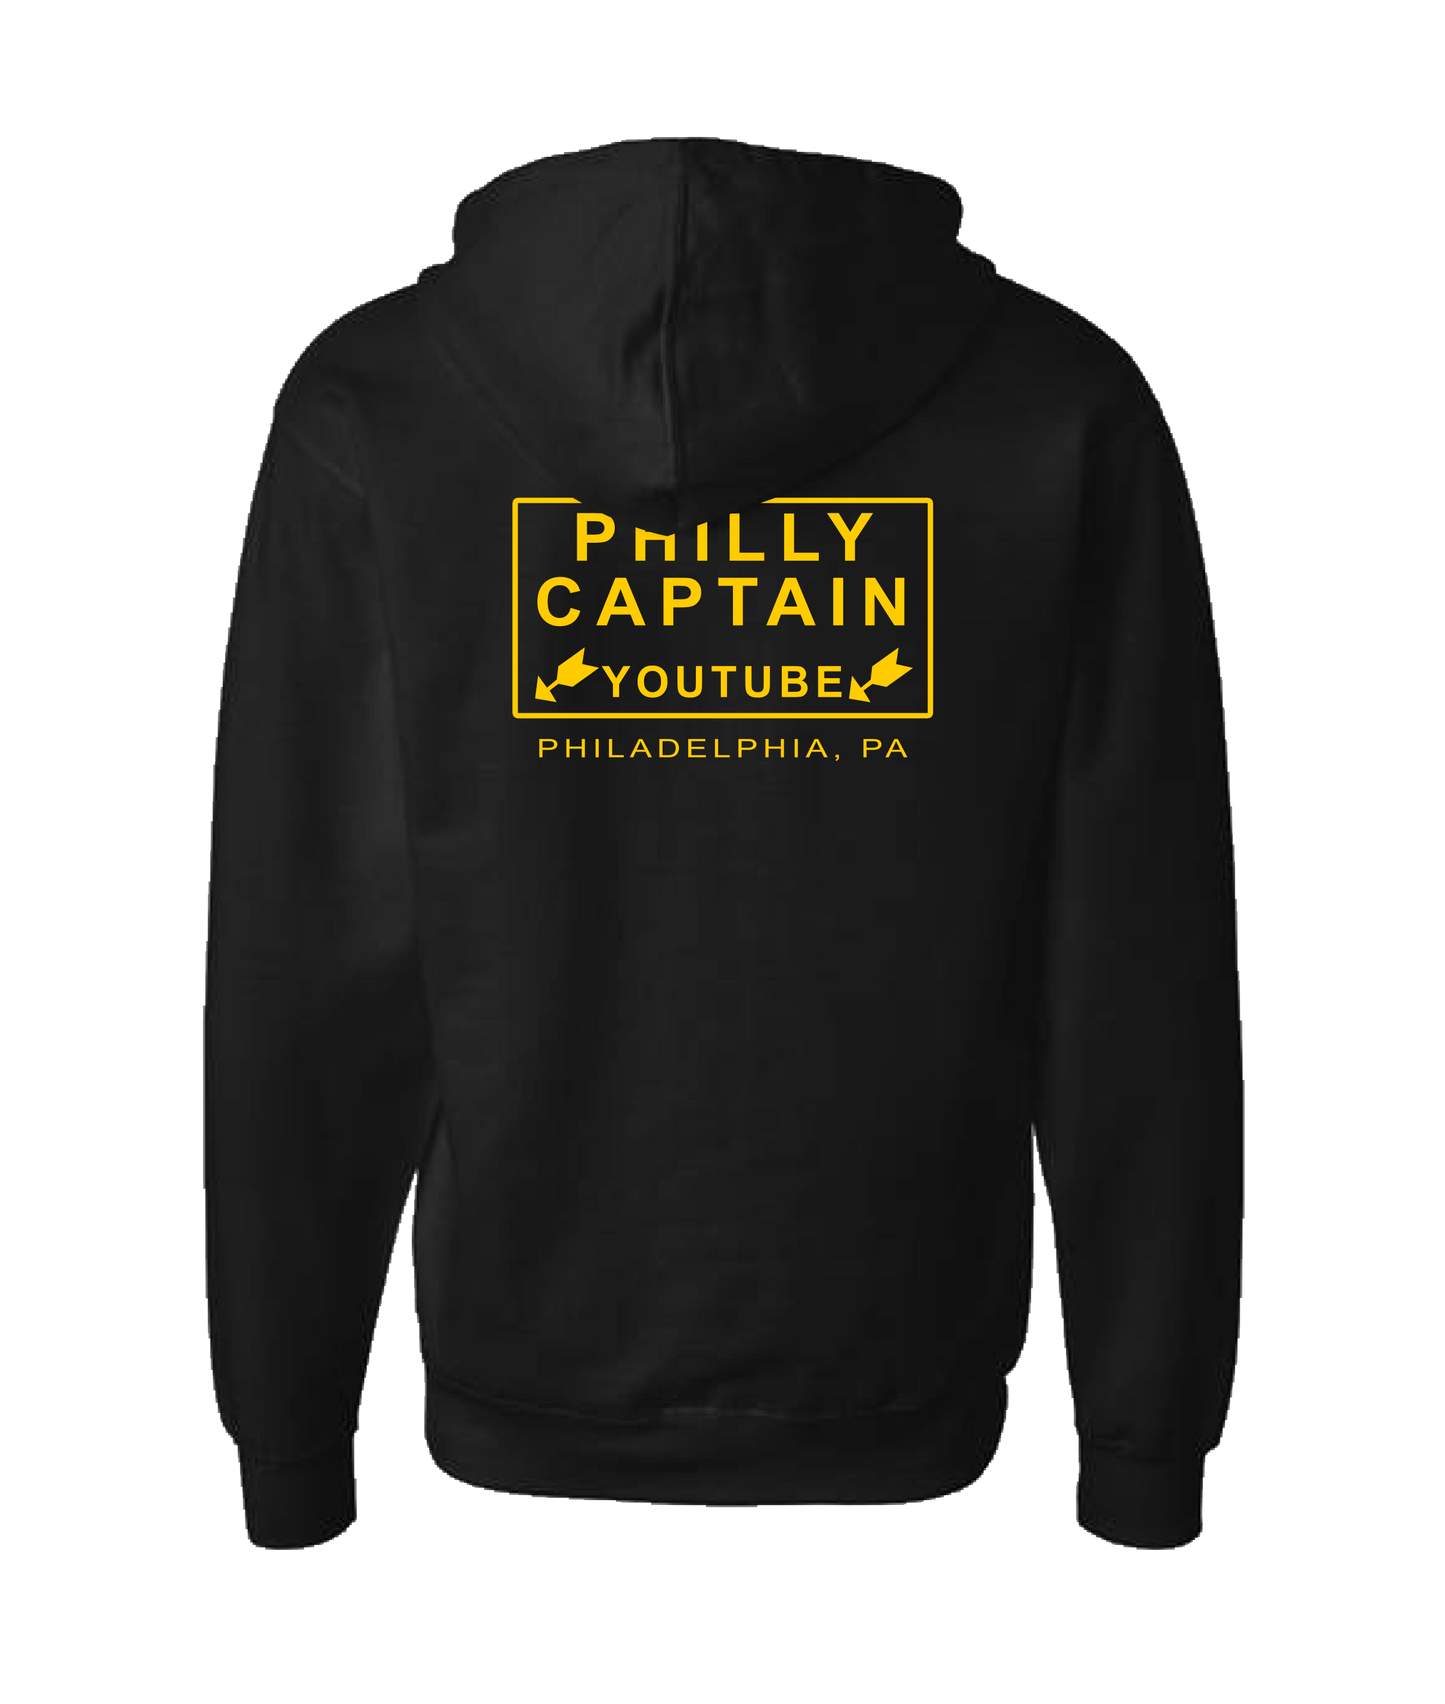 The Philly Captain's Merch is Fire - YouTube - Black Zip Up Hoodie